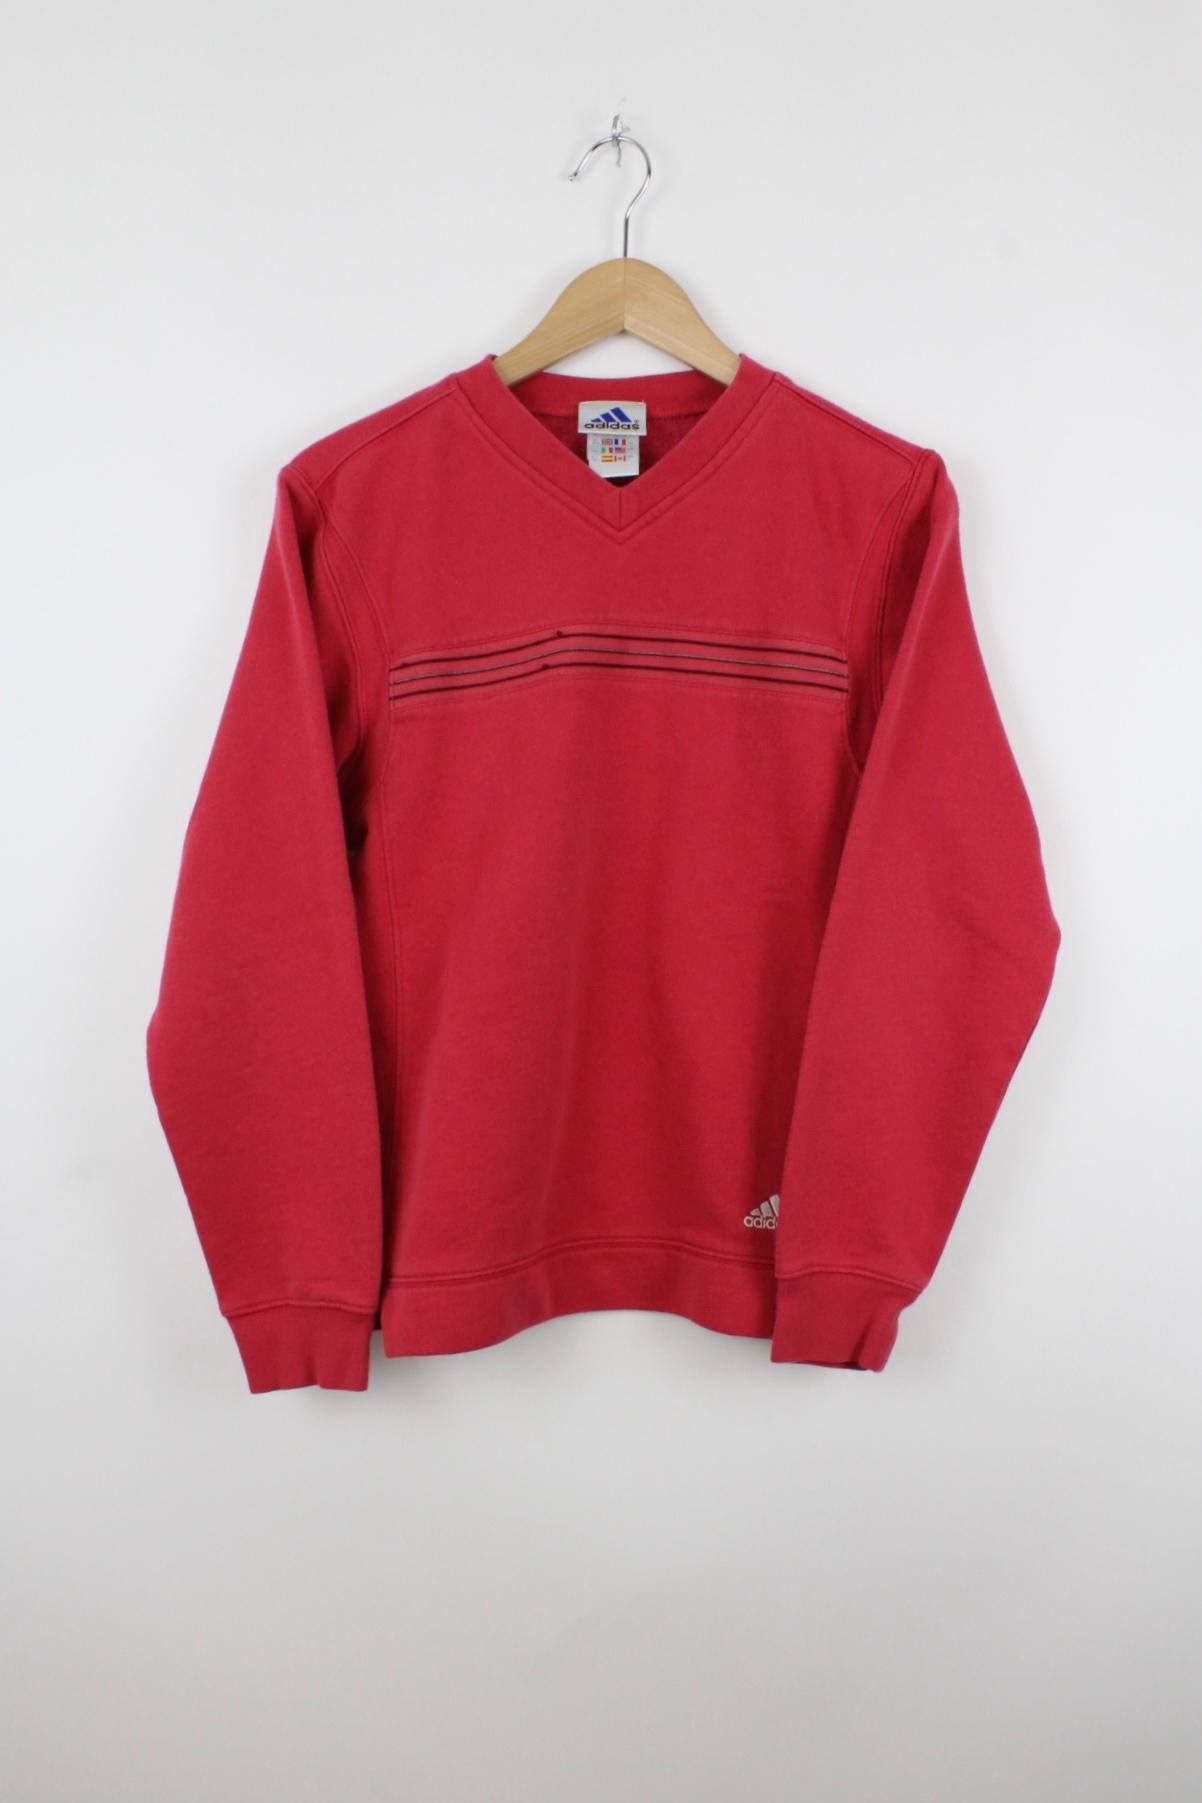 Vintage Adidas Sweater Rot - S